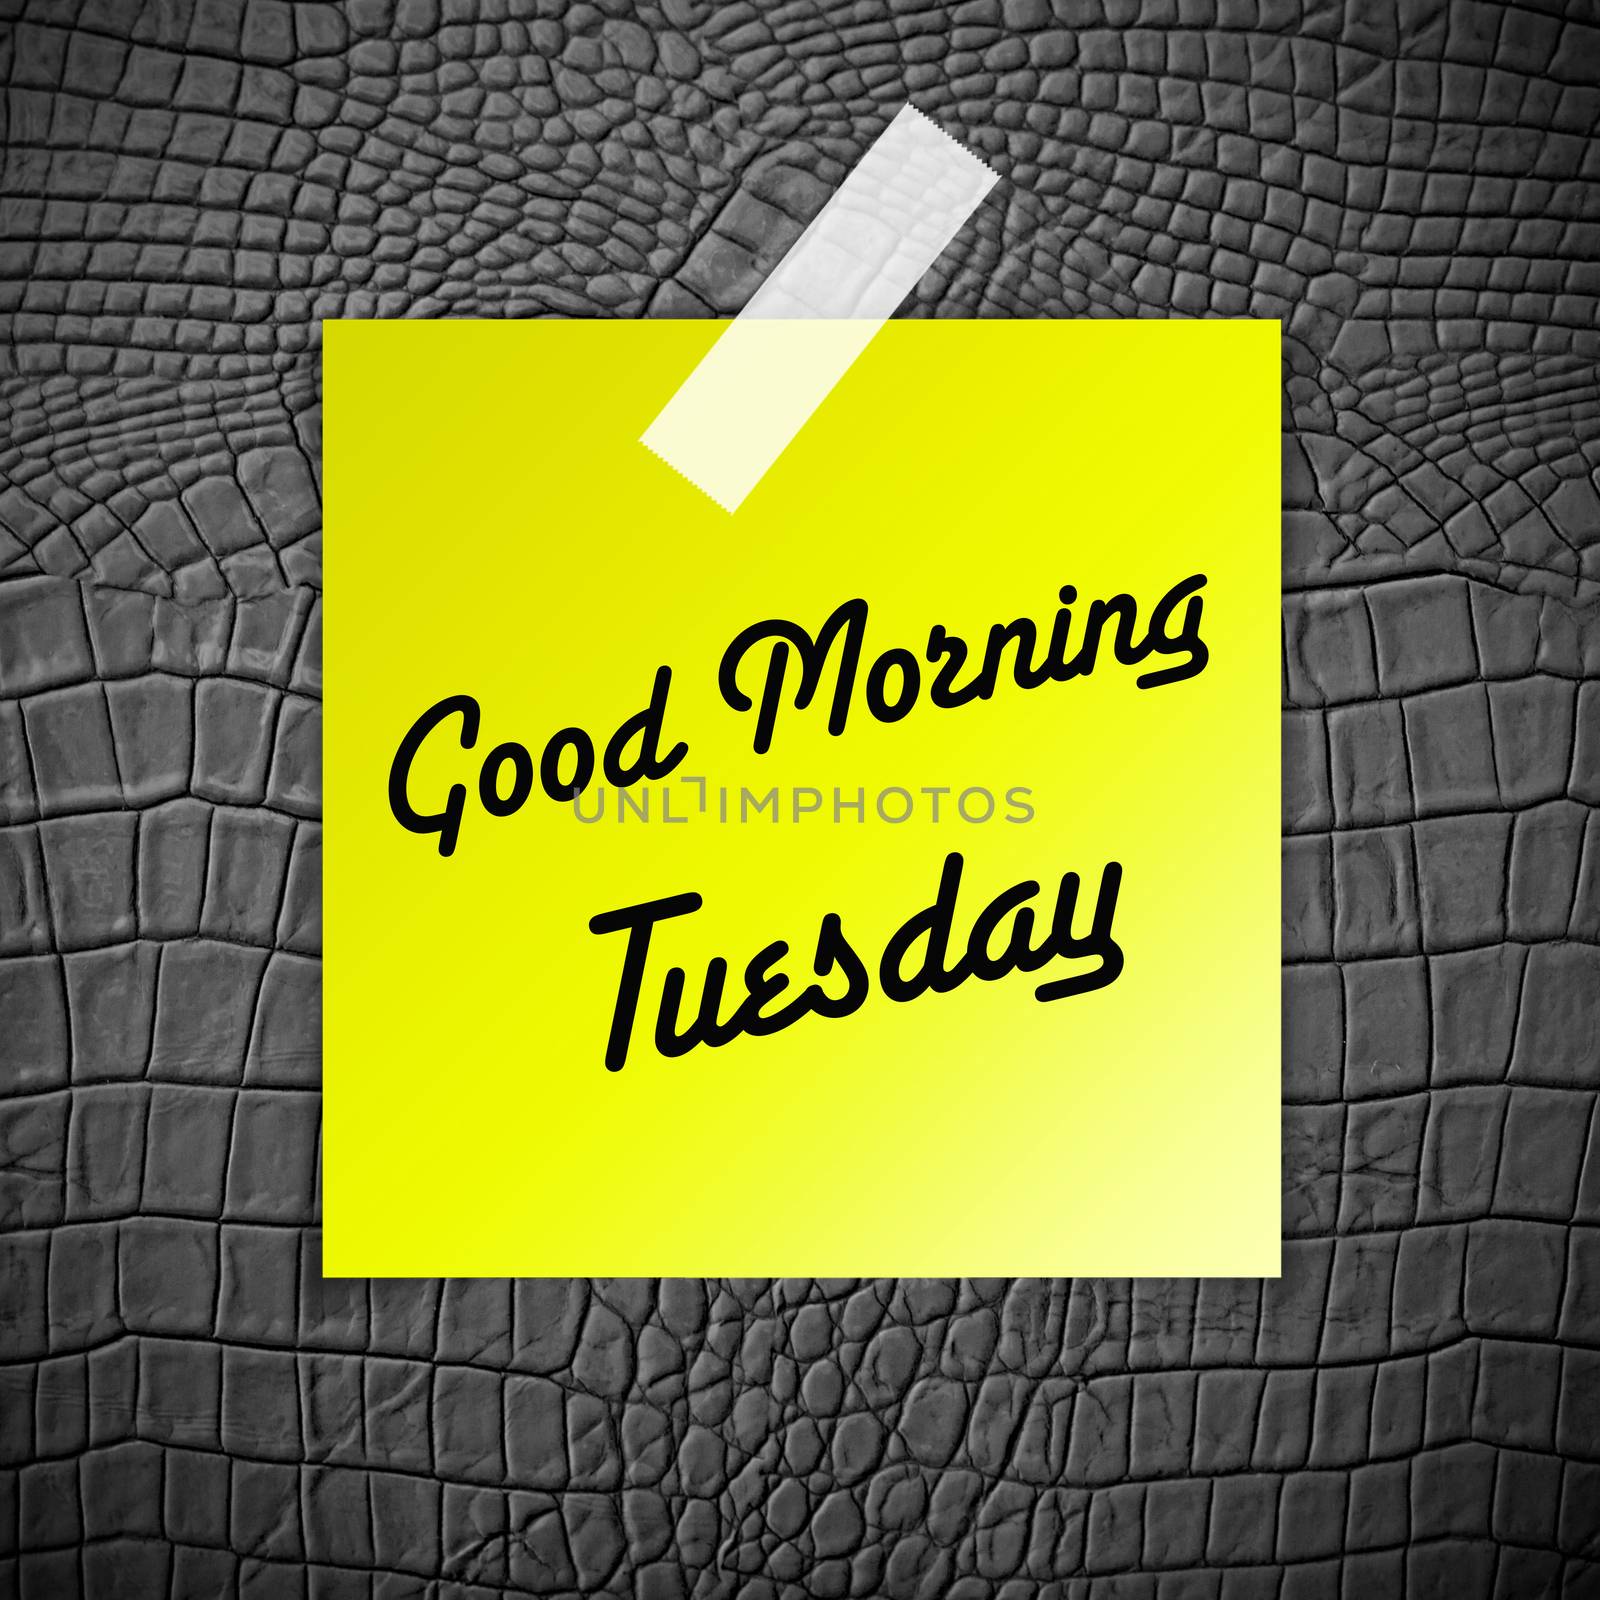 Good morning Tuesday working day on Grey Leather texture background